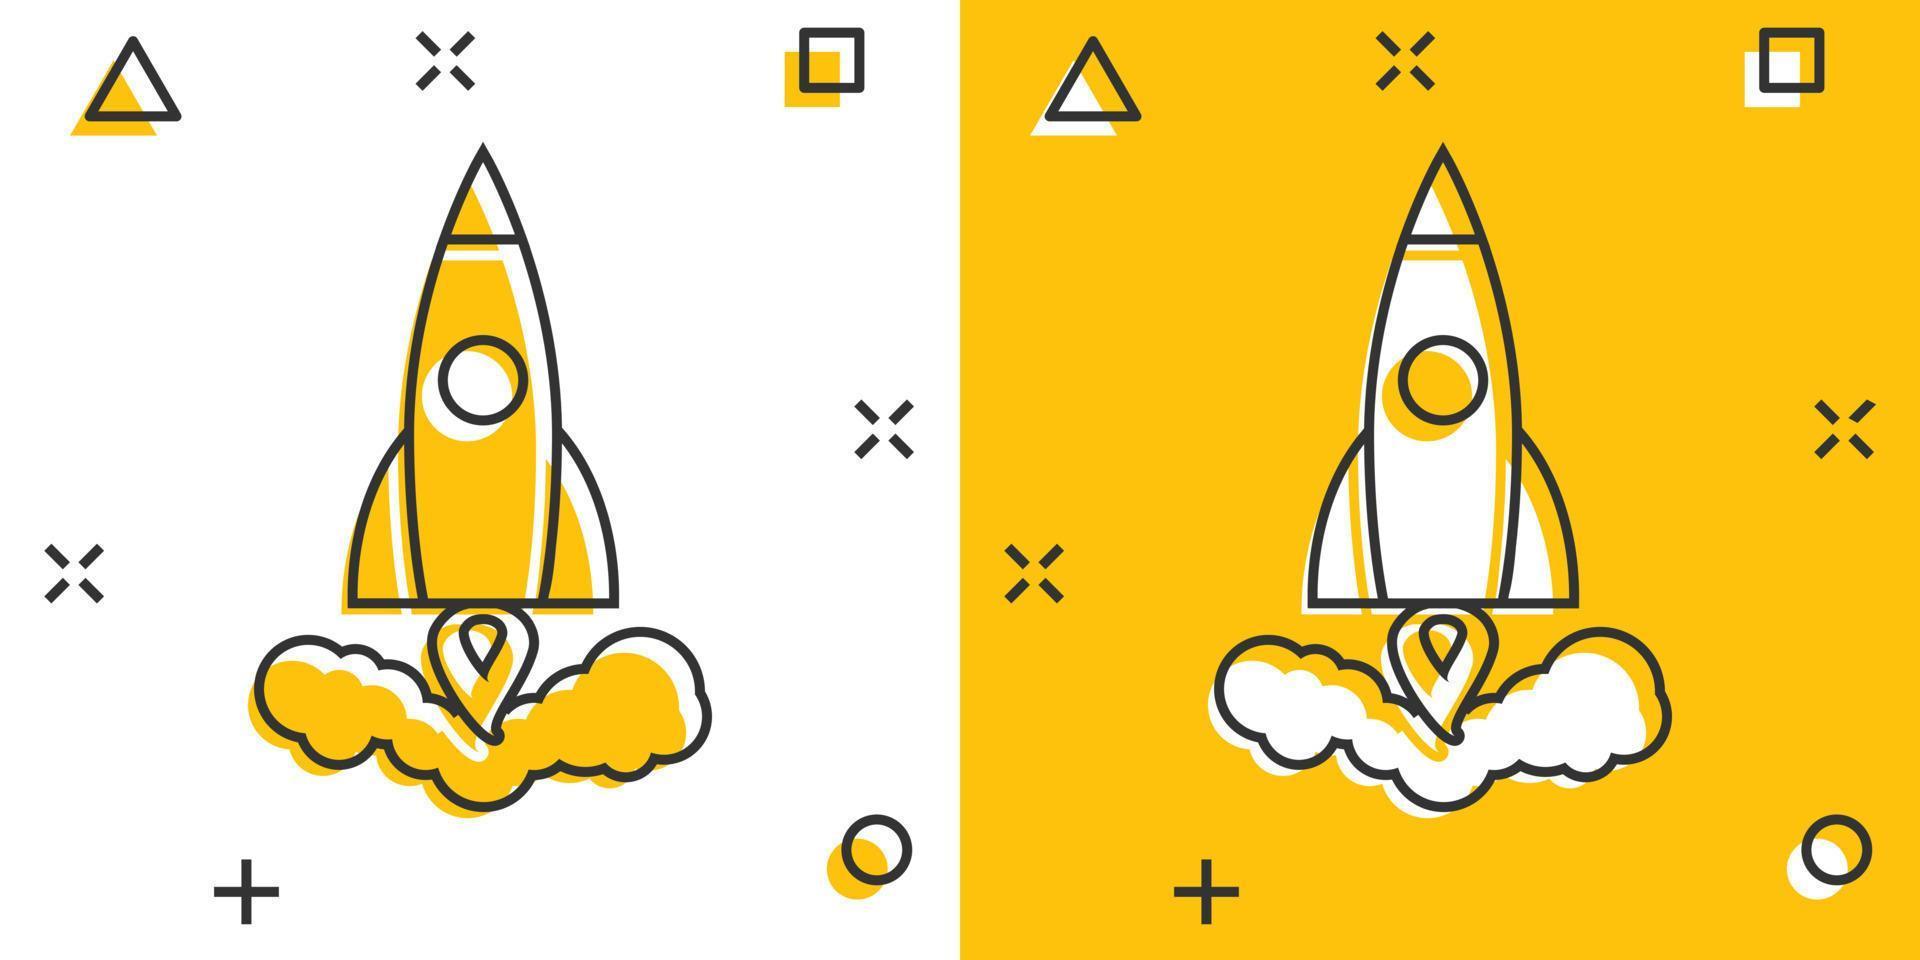 Vector cartoon rocket icon in comic style. Startup launch sign illustration pictogram. Rocket business splash effect concept.